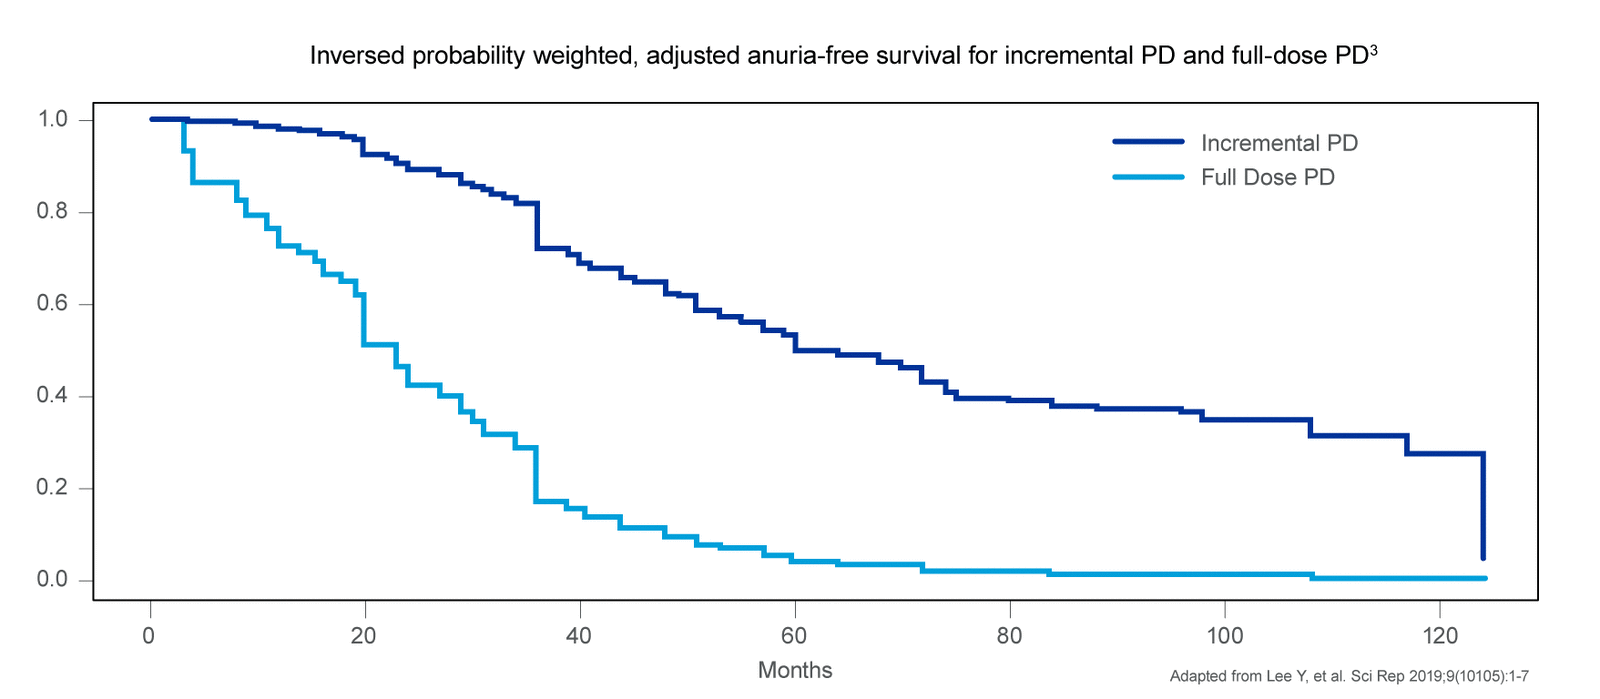 chart showing Inversed probability weighted, adjusted anuria-free survival for incremental PD and full-dose PD